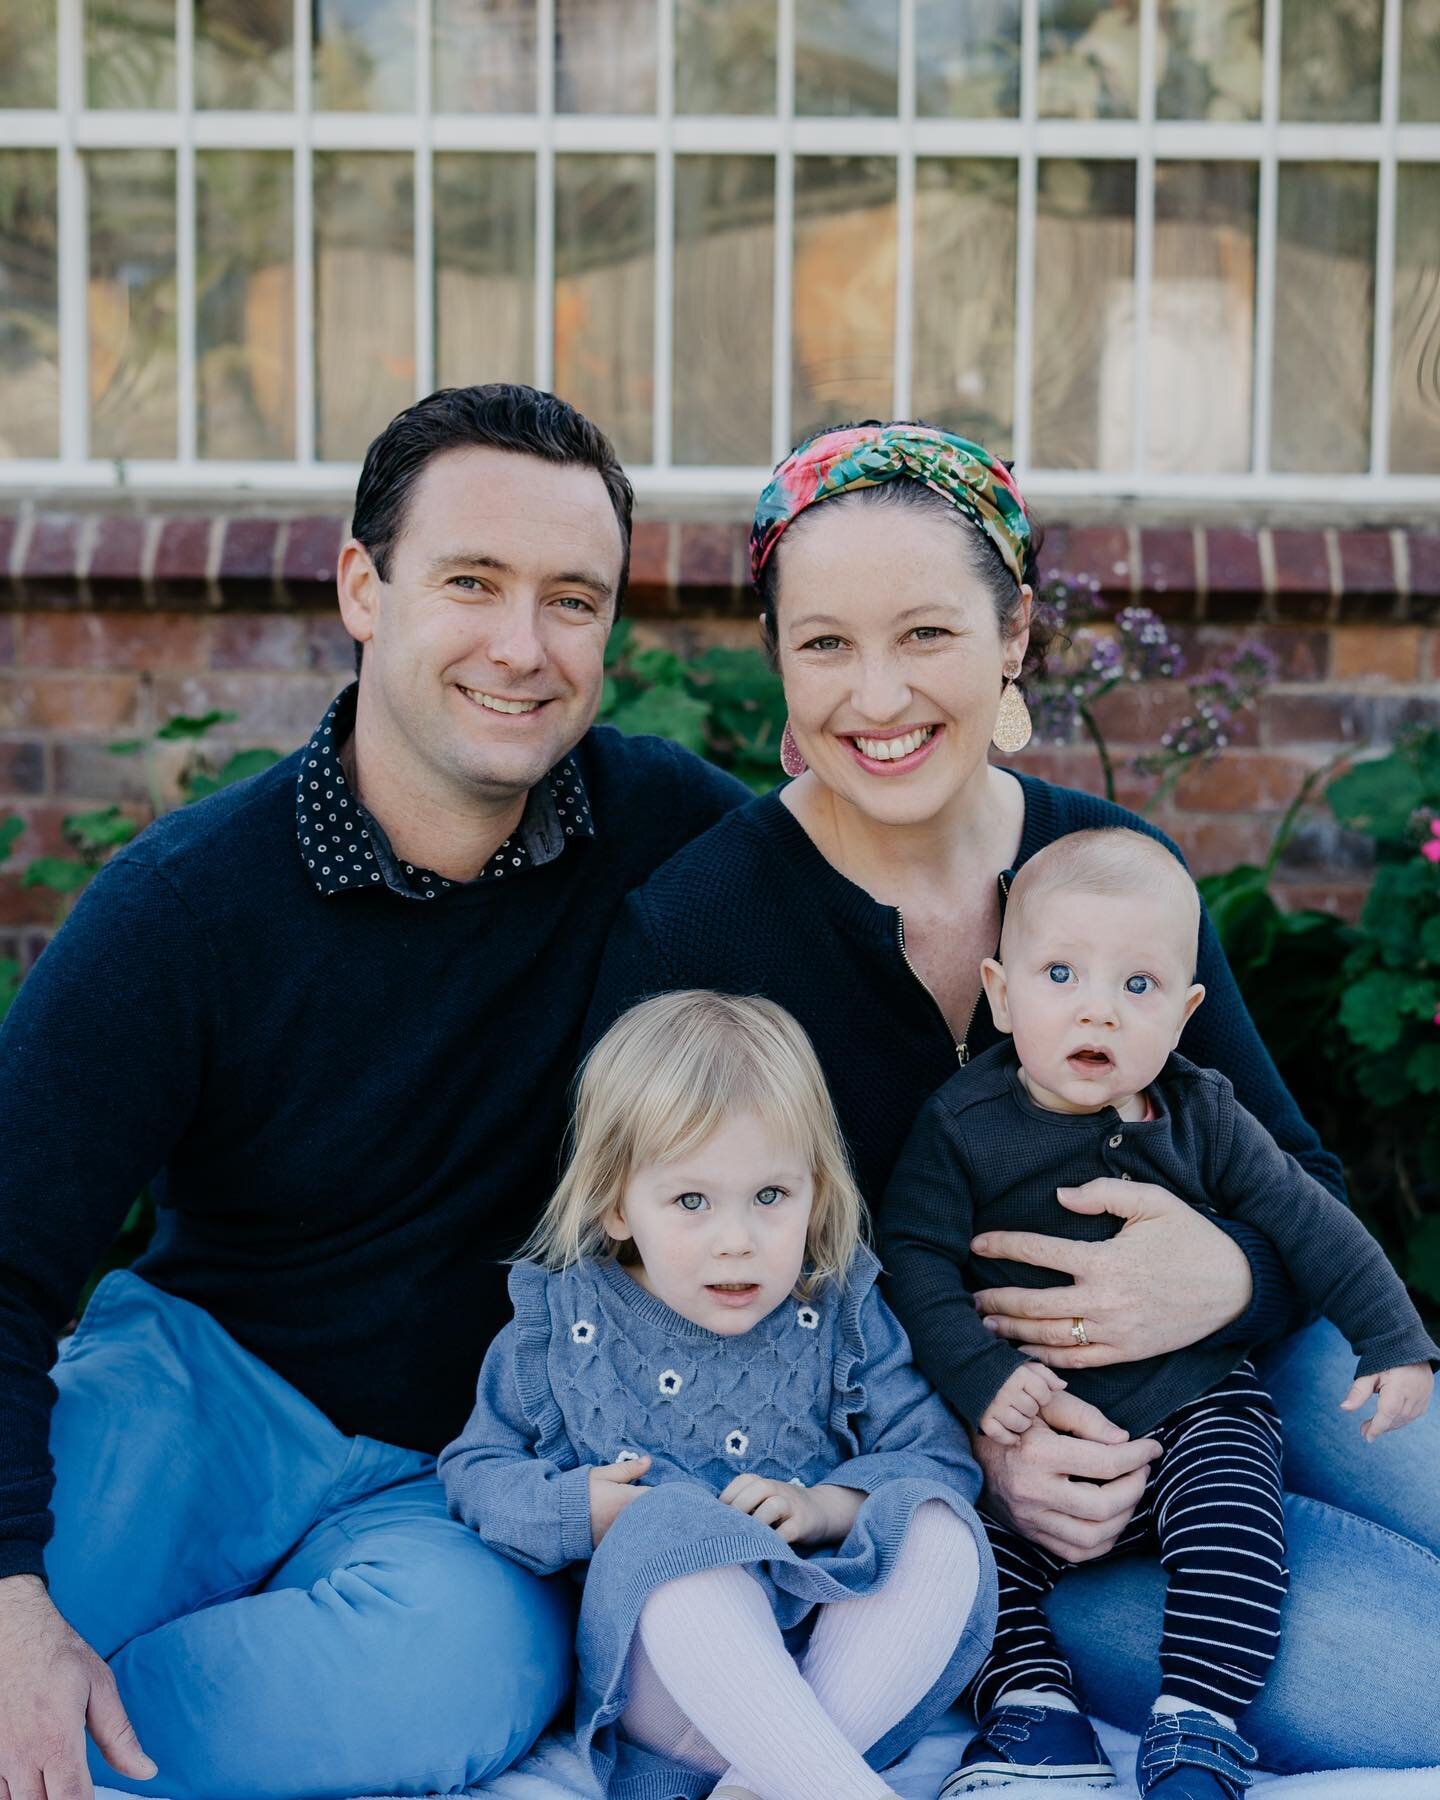 Throwing it back to this gorgeous family portrait session 🤍

Have you considered updated family photos for Christmas cards this year or just updated family photos in general? If this sounds like something you&rsquo;d be interested in, I&rsquo;m happ